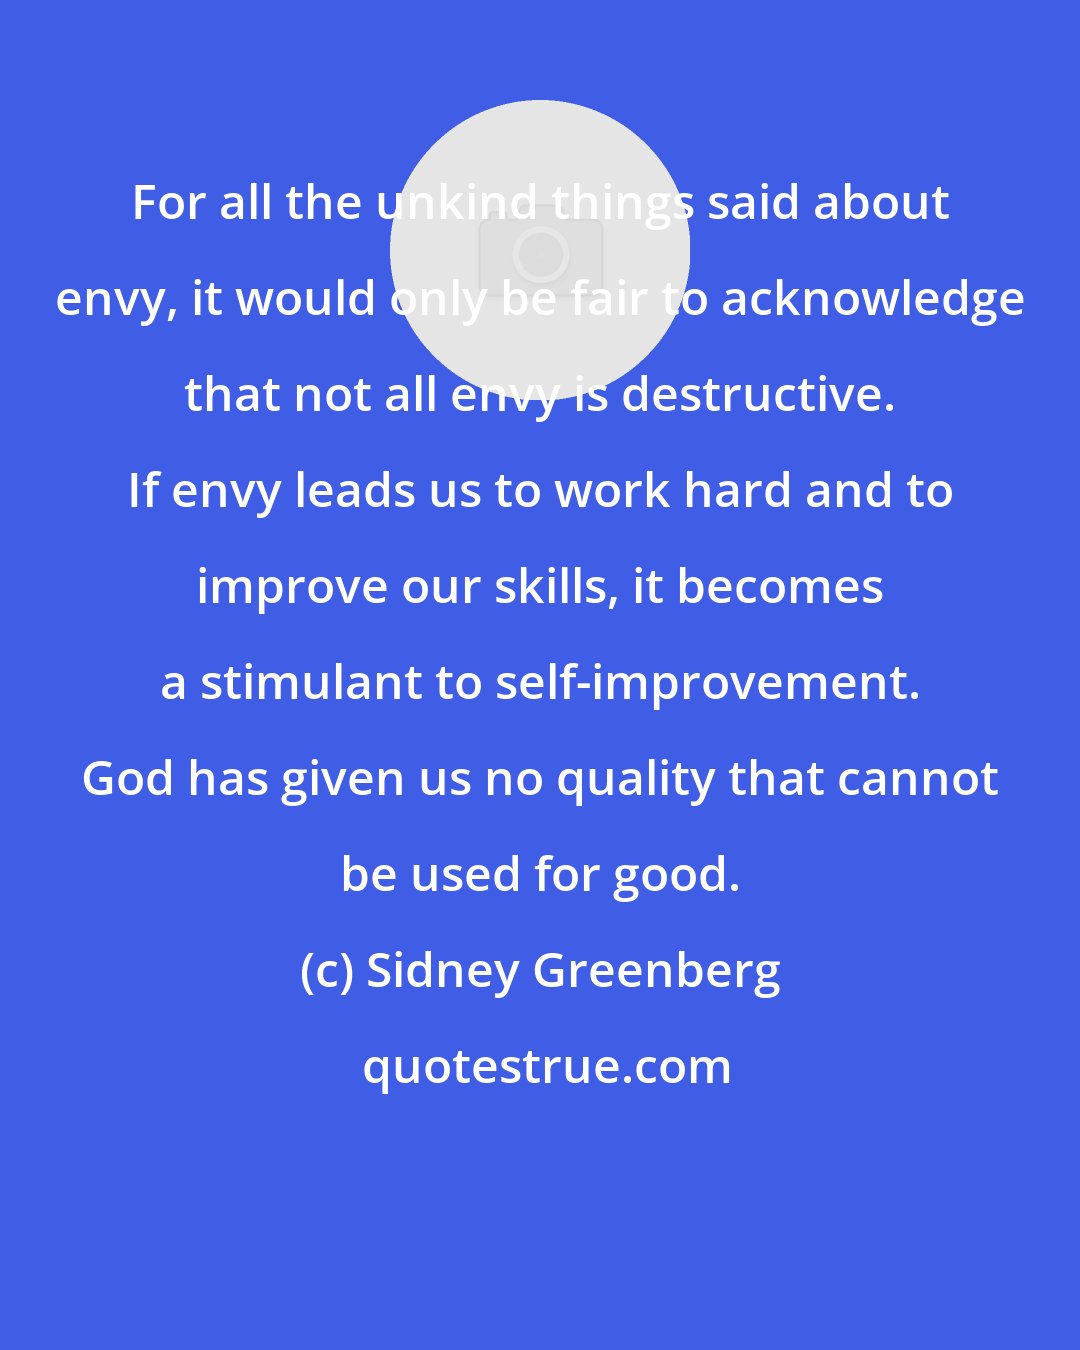 Sidney Greenberg: For all the unkind things said about envy, it would only be fair to acknowledge that not all envy is destructive. If envy leads us to work hard and to improve our skills, it becomes a stimulant to self-improvement. God has given us no quality that cannot be used for good.